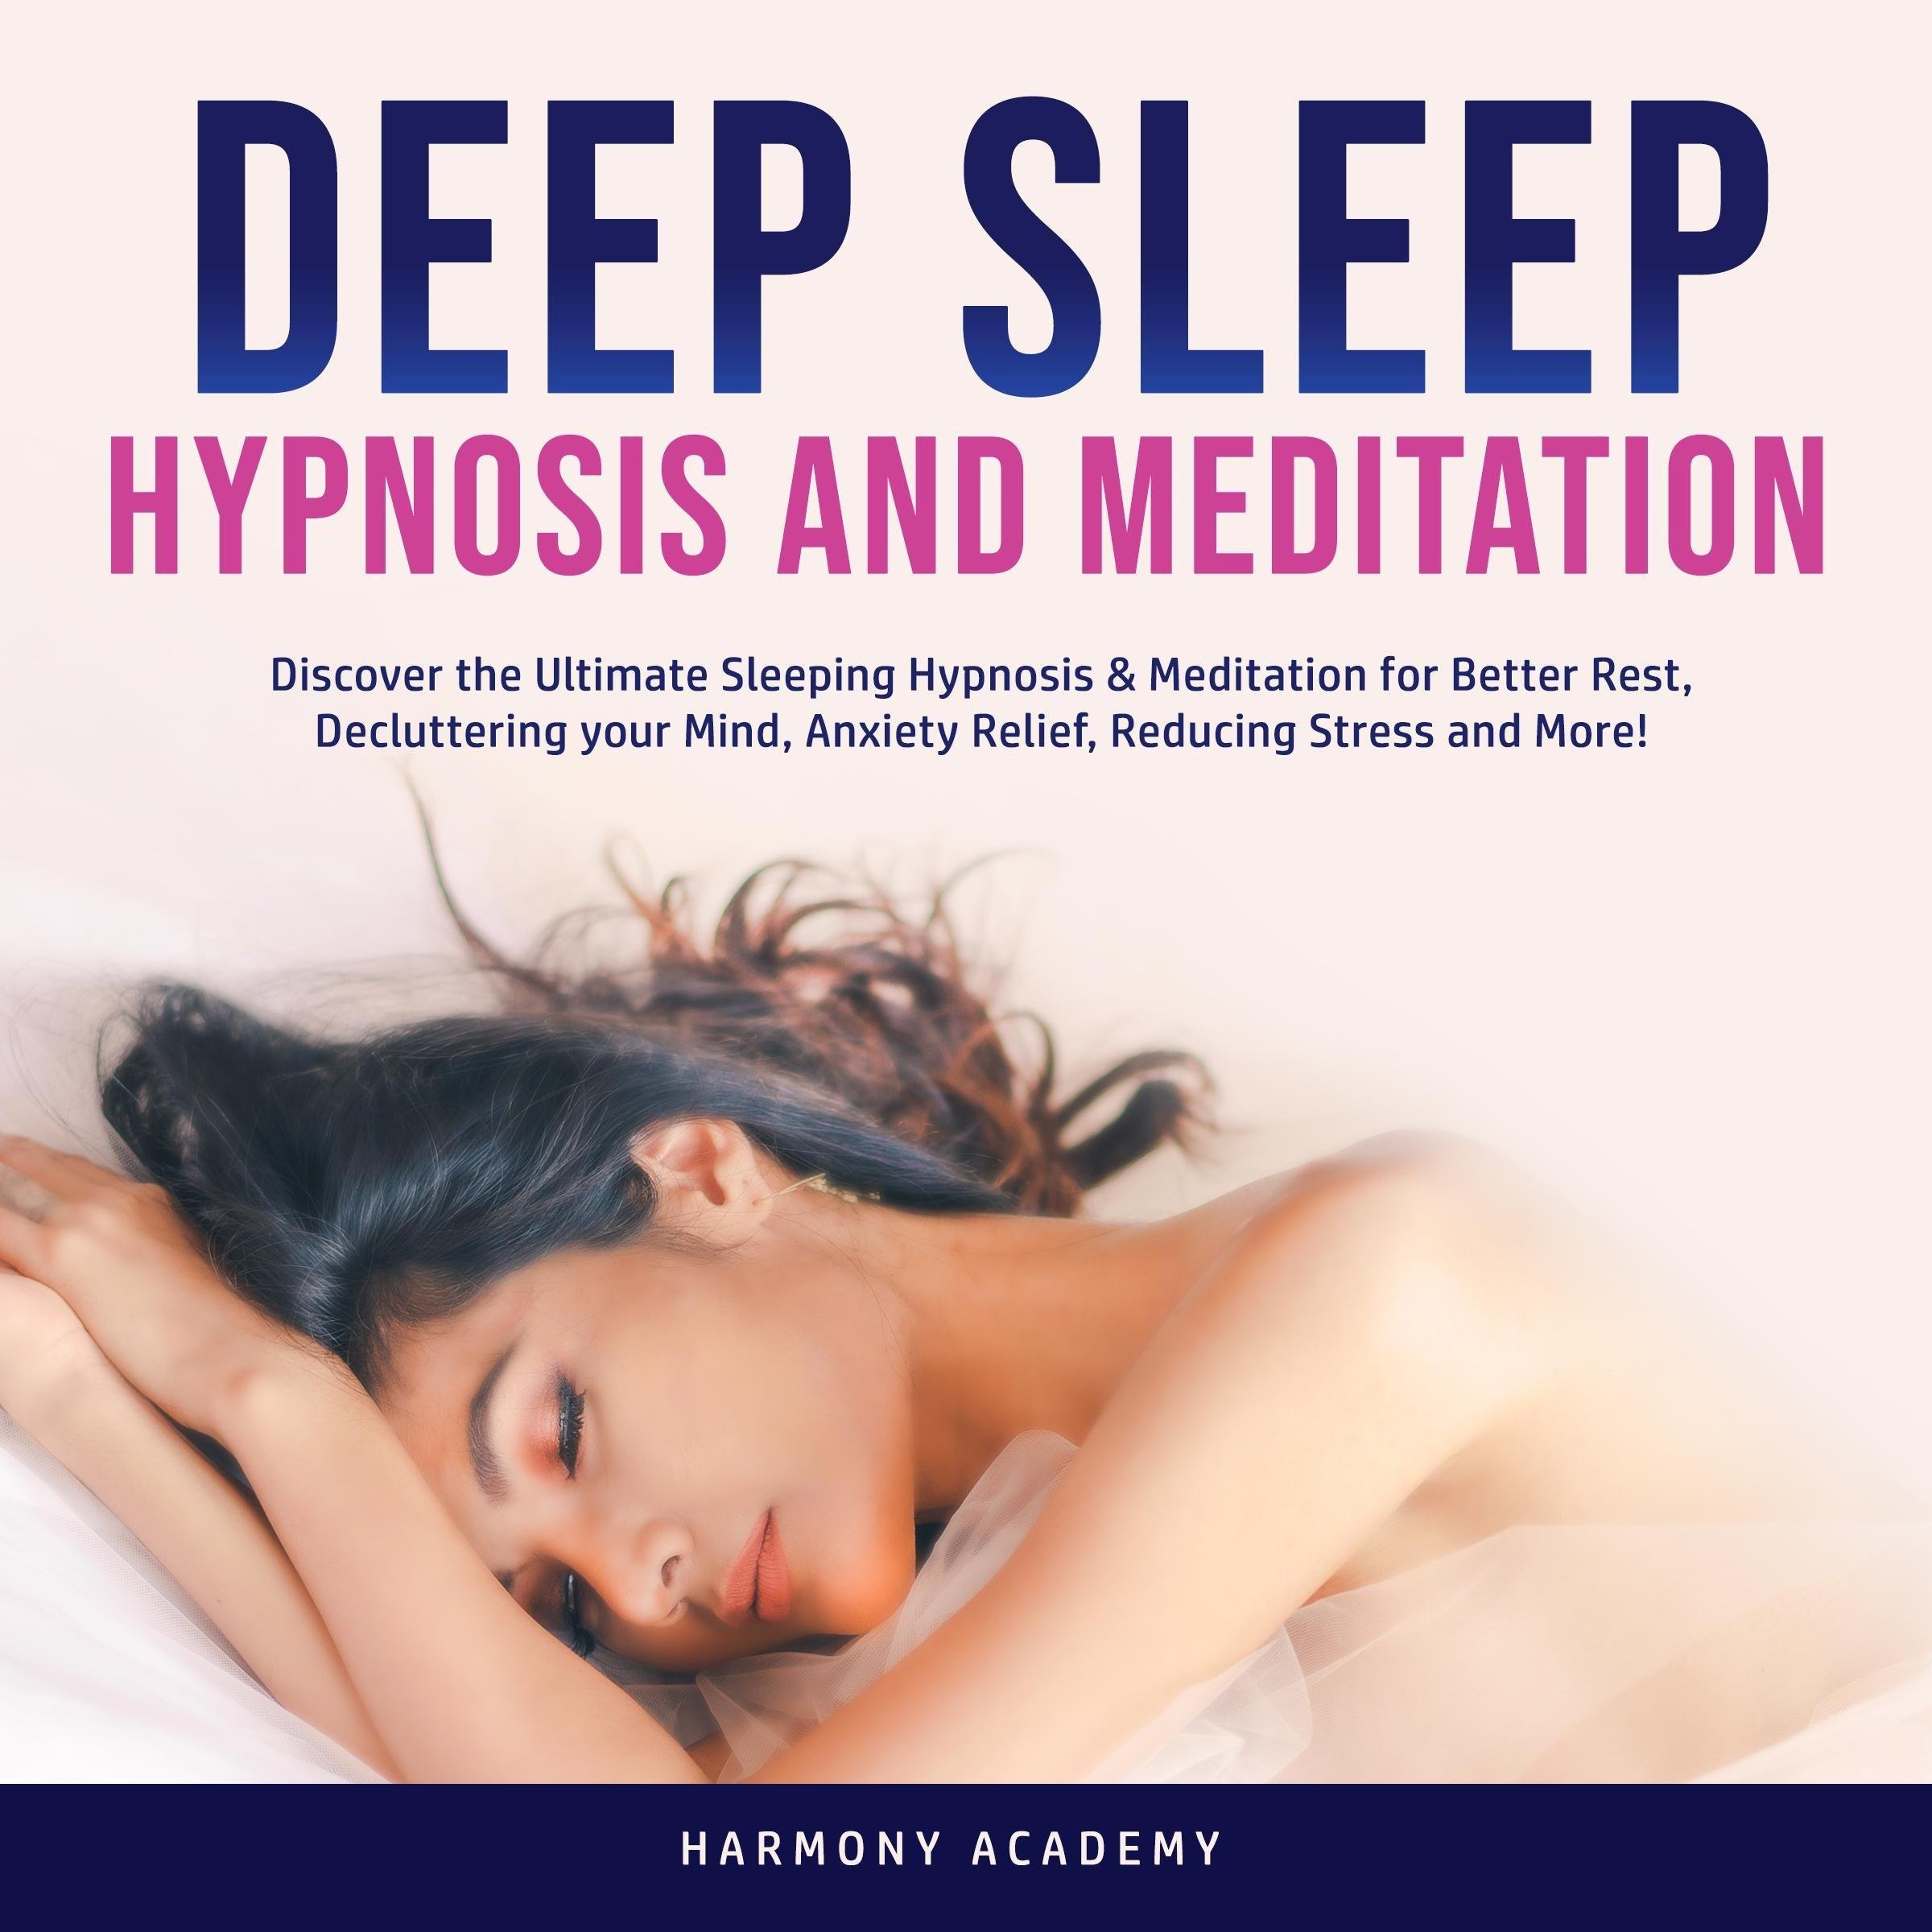 Anxiety Relief Hypnosis